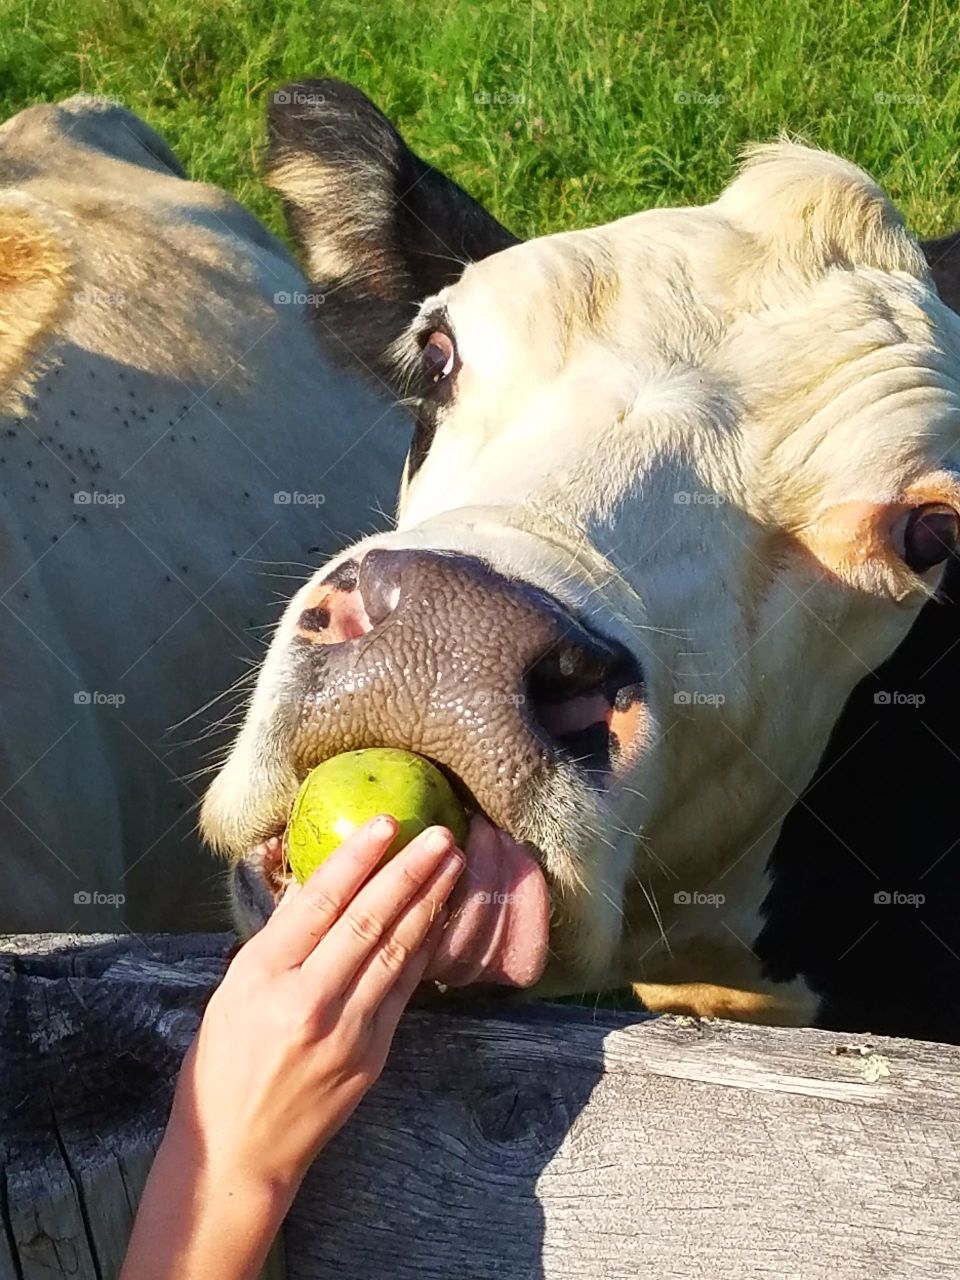 Cow Eating